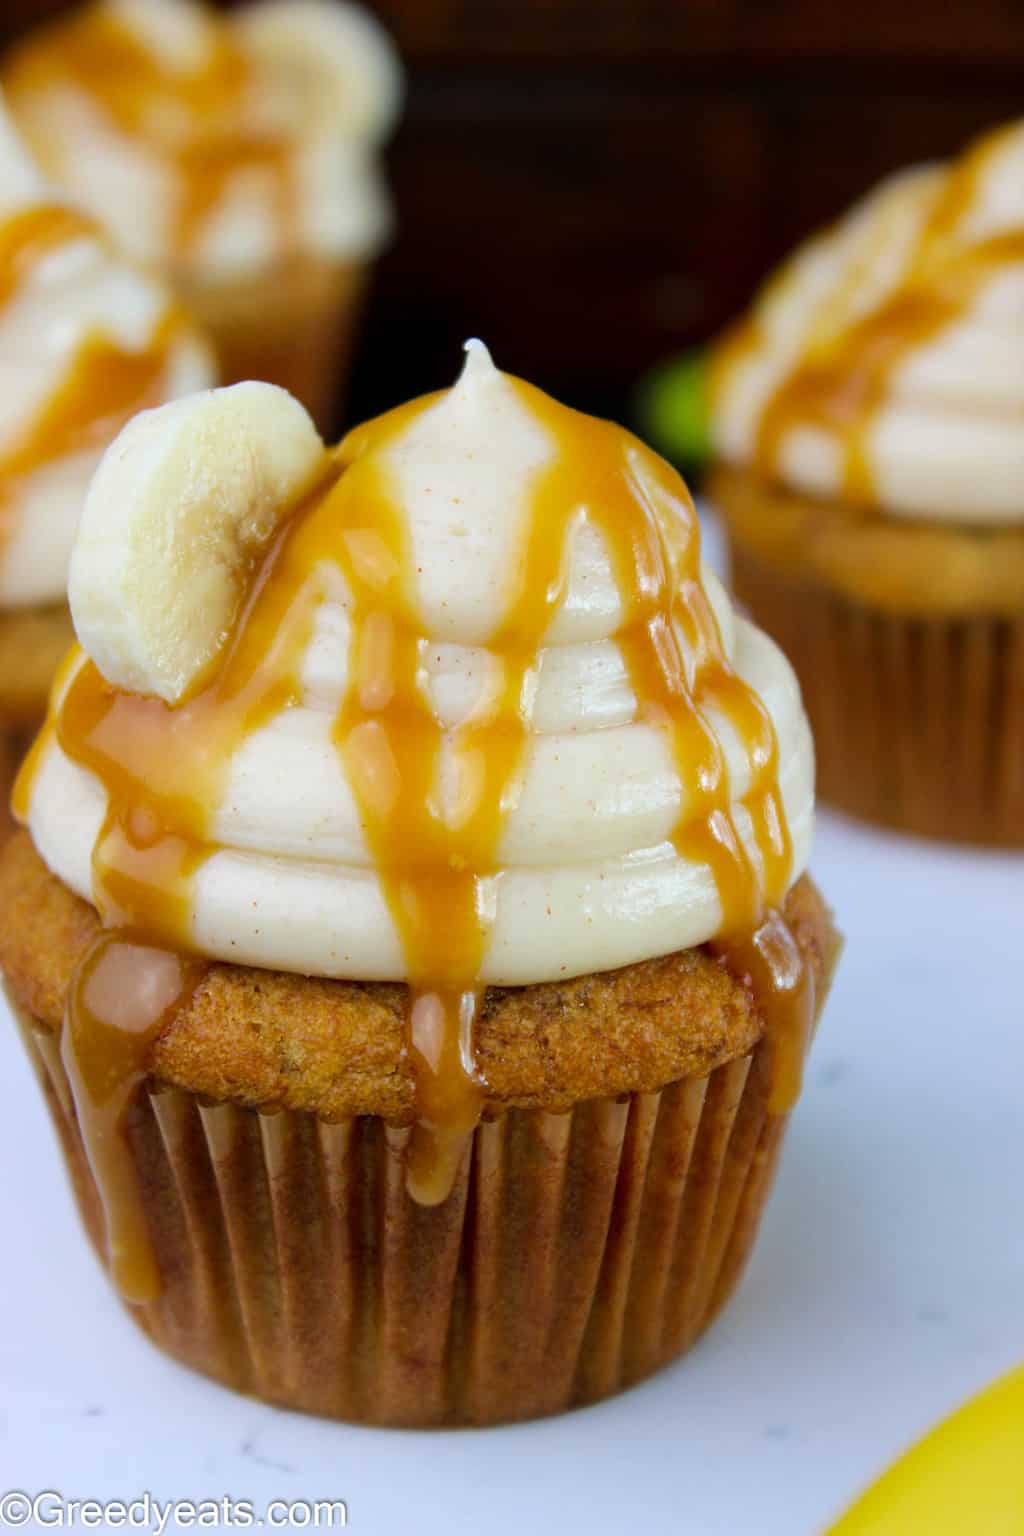 Best Banana cupcakes with cream cheese frosting bake super soft, fluffy and tender. They'll be a new fall favorite dessert soon!